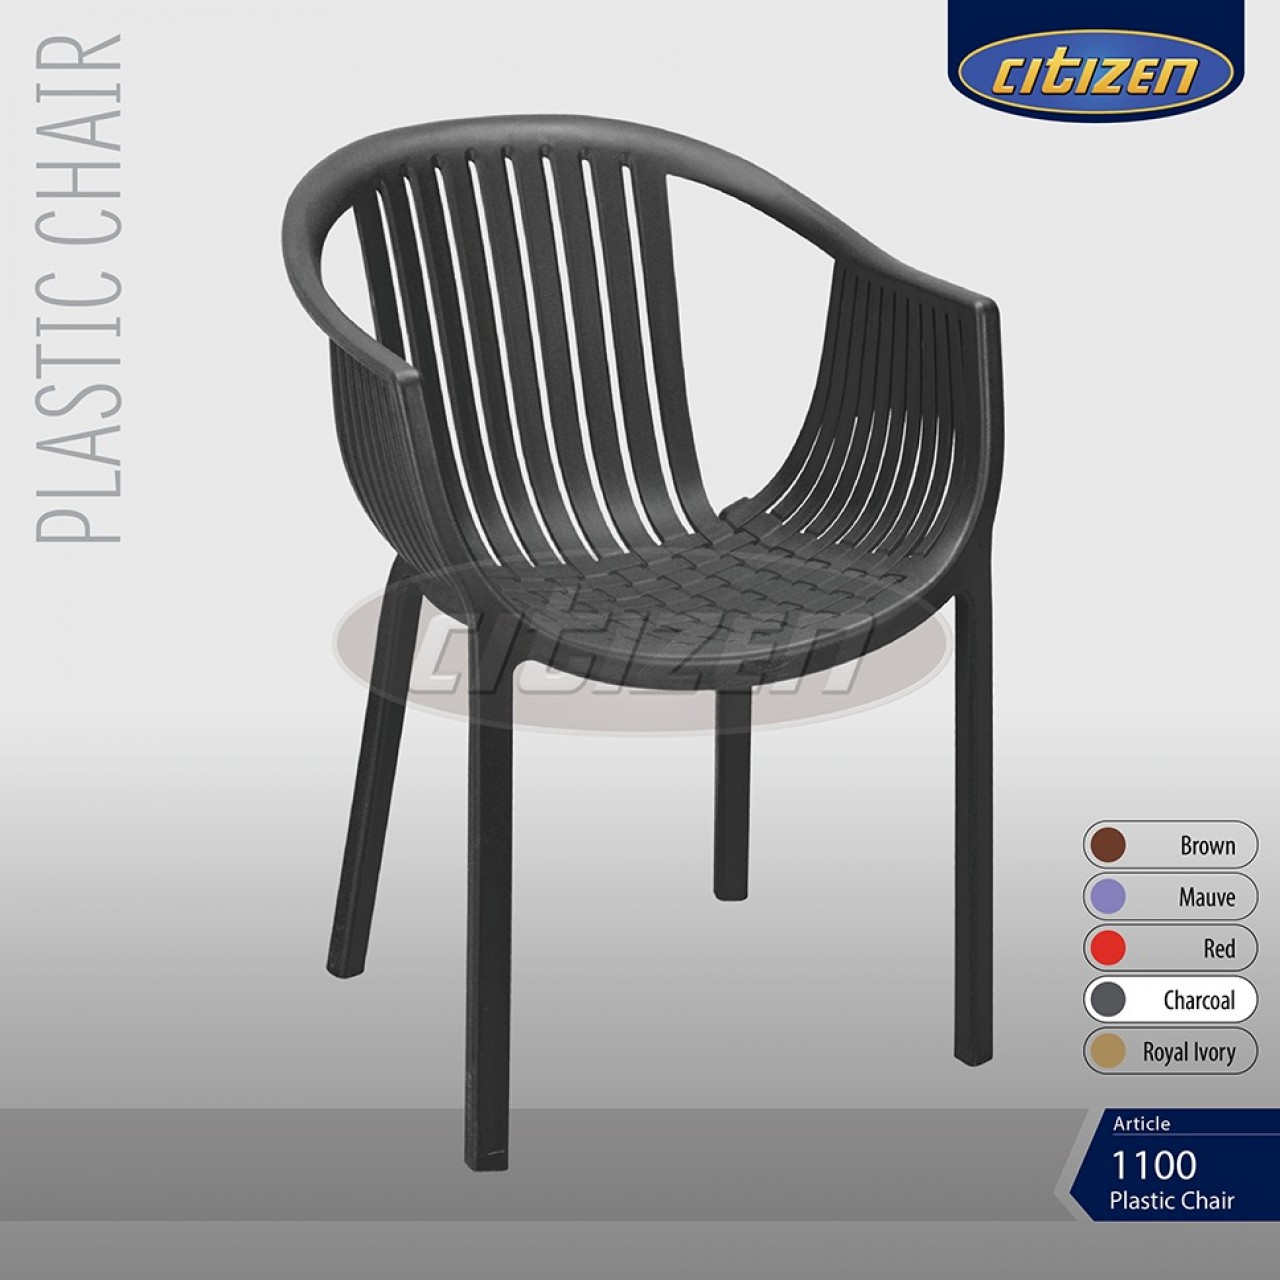 Citizen 1100 Plastic Crystal Chair - Furniture For Home